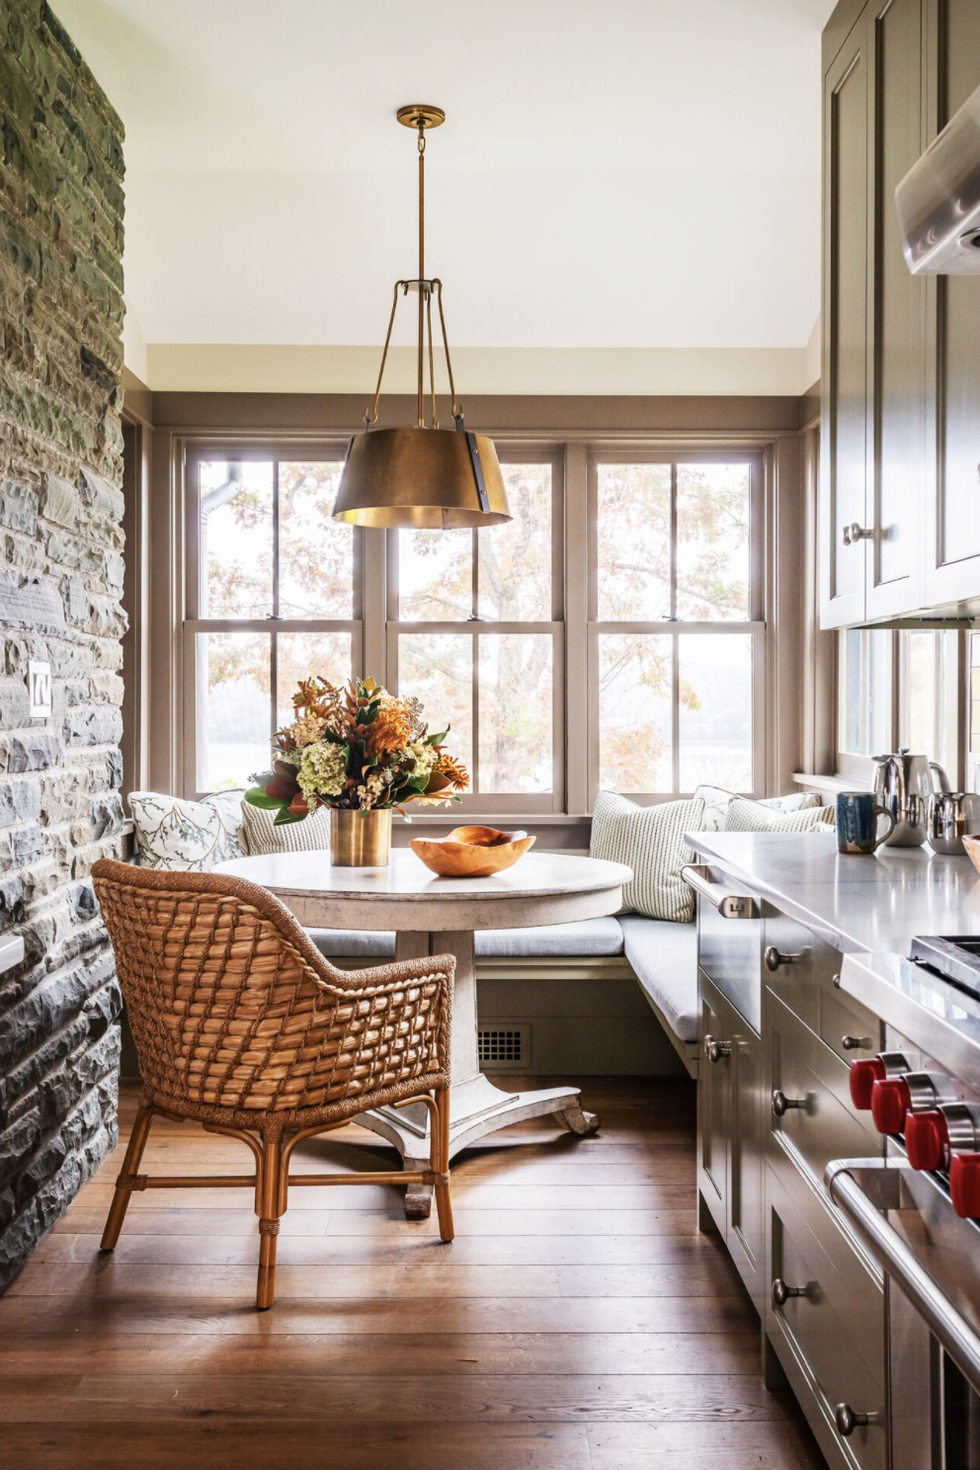 https://hips.hearstapps.com/hmg-prod/images/french-country-kitchen-ideas-audrey-hall-designed-by-alan-tanksley-inc-1649037265.png?crop=0.8641114982578397xw:1xh;center,top&resize=980:*